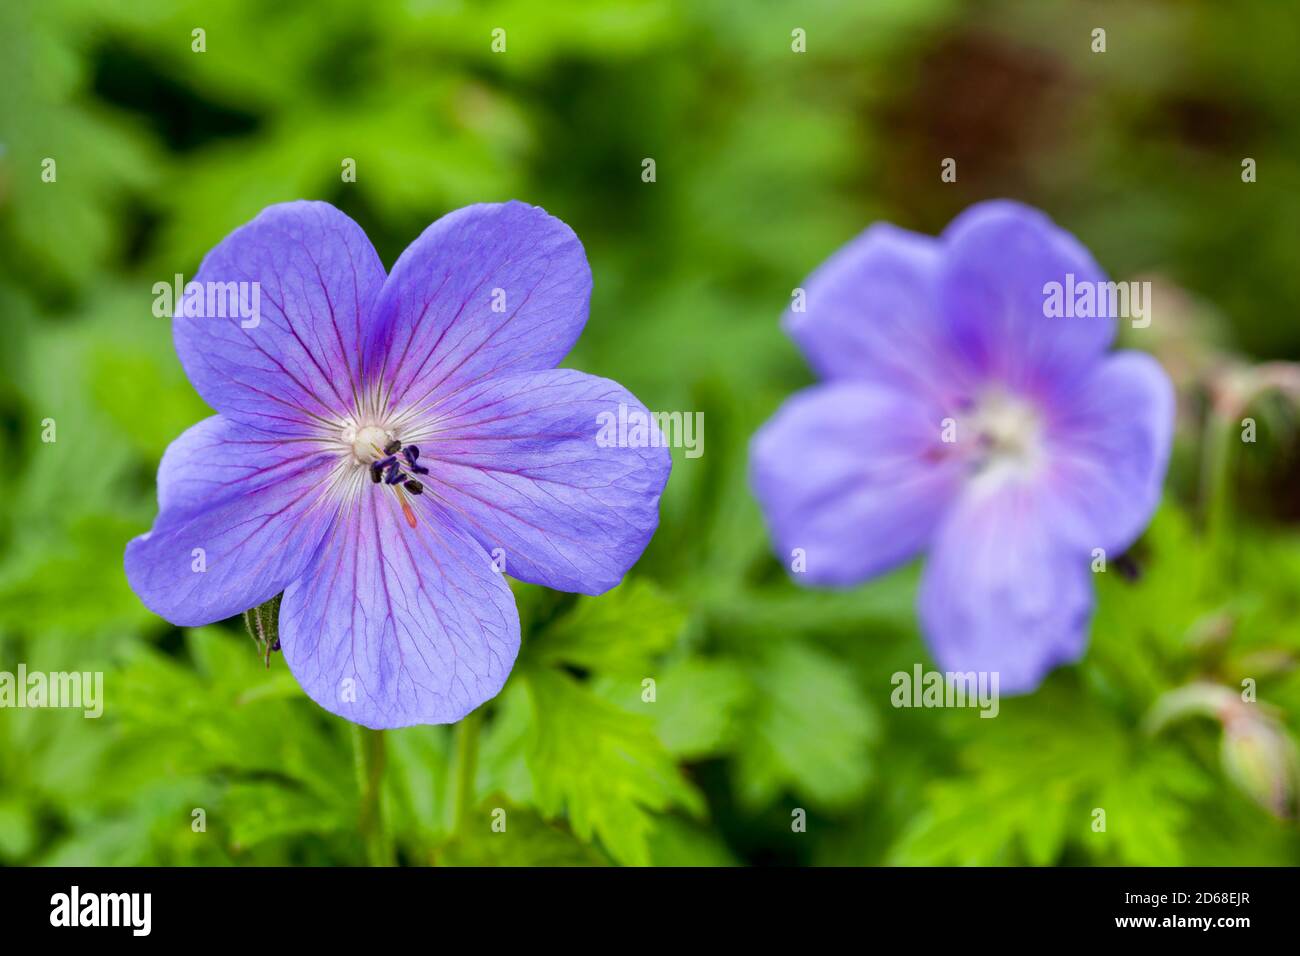 Geranium himalayense 'Irish Blue' a springtime summer flower which is a spring herbaceous perennial plant commonly known as cranesbill Stock Photo